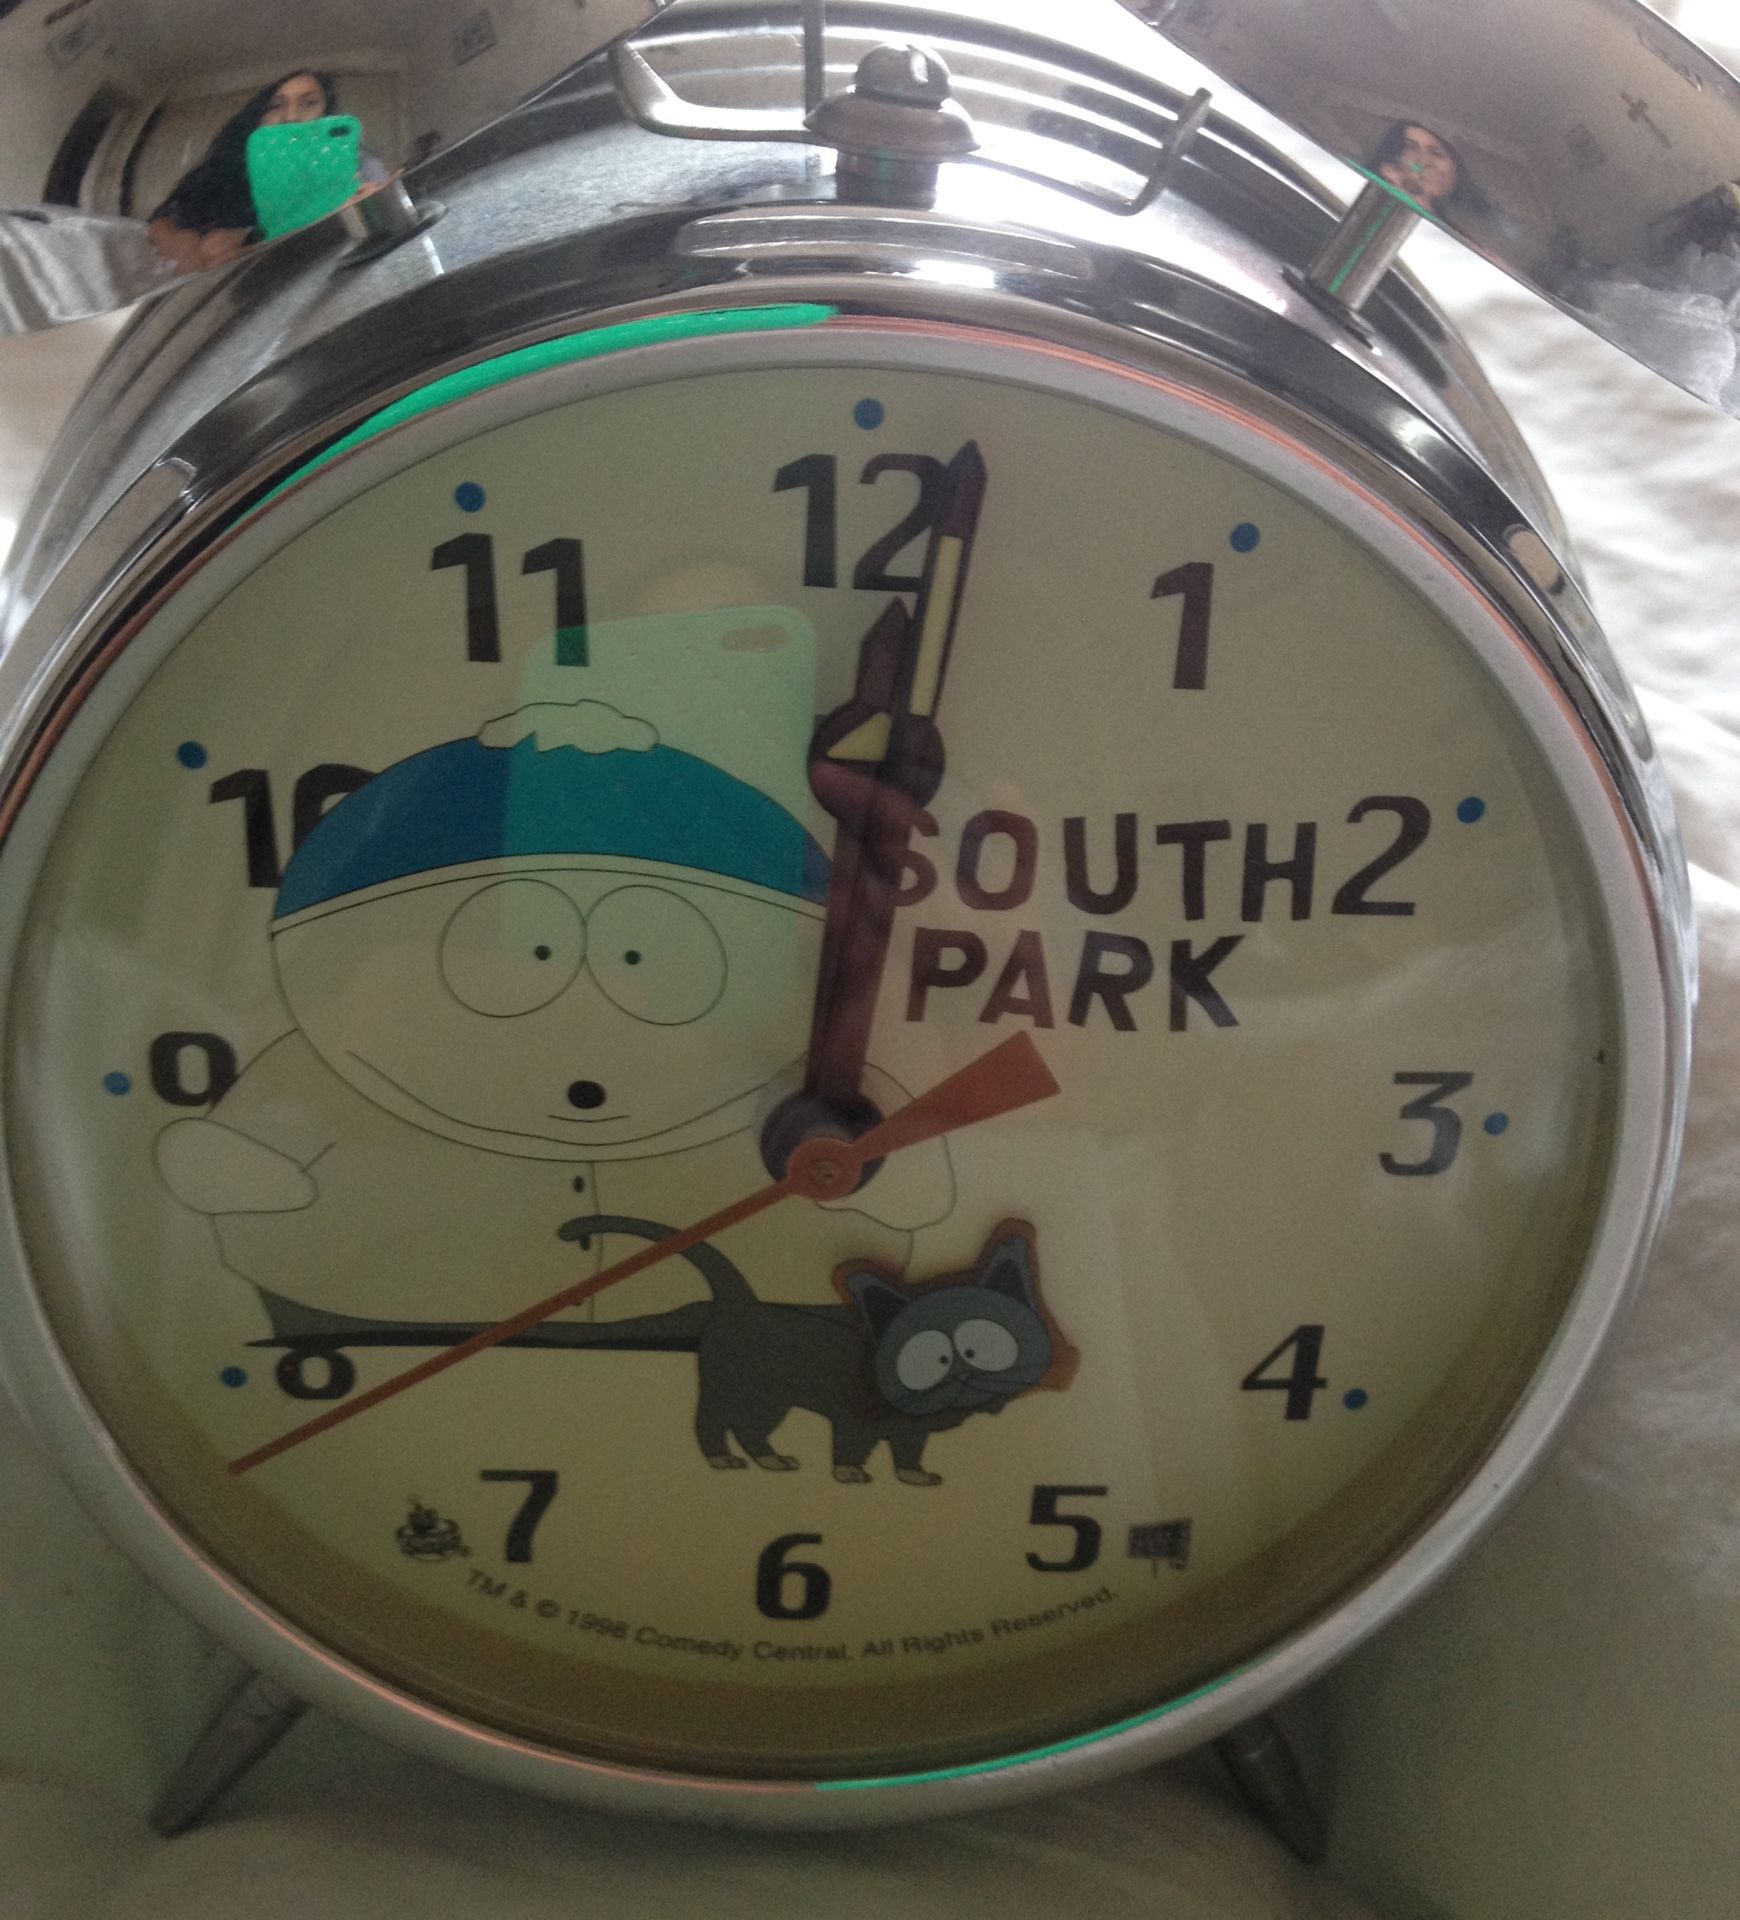 South Park collectible wind up alarm clock